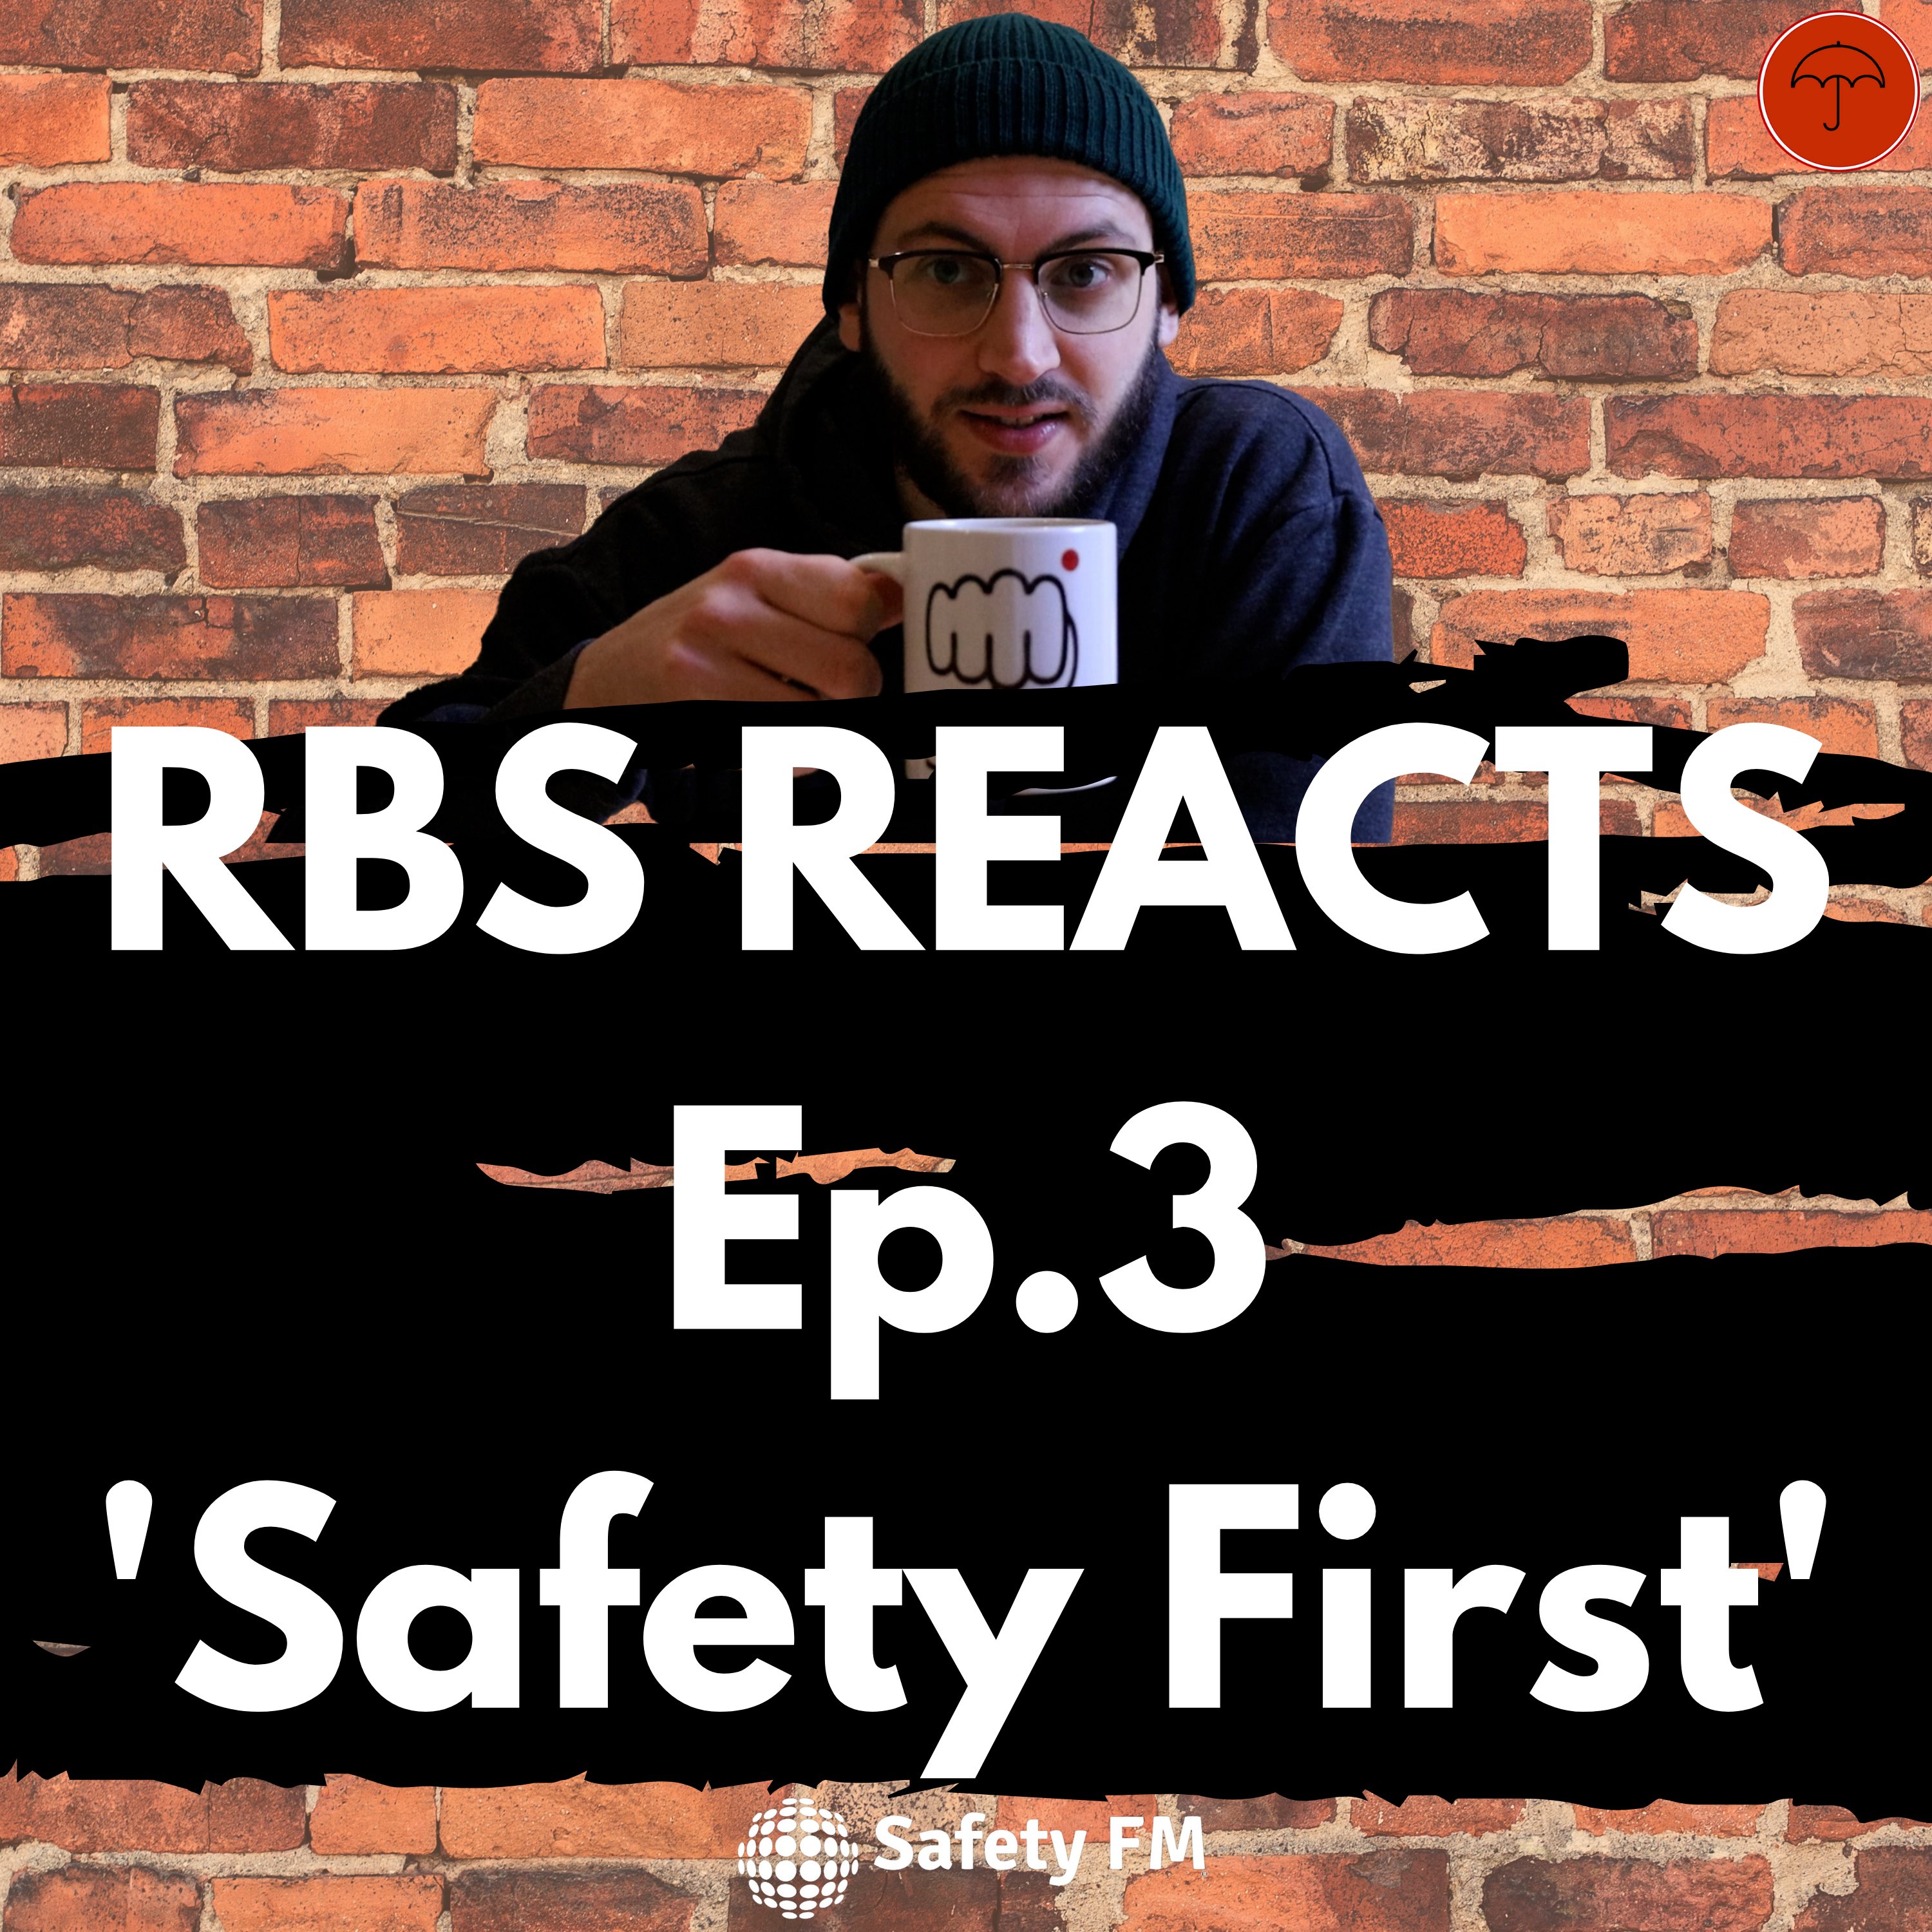 Rebranding Safety REACTS - Episode 3 - 'Safety First'